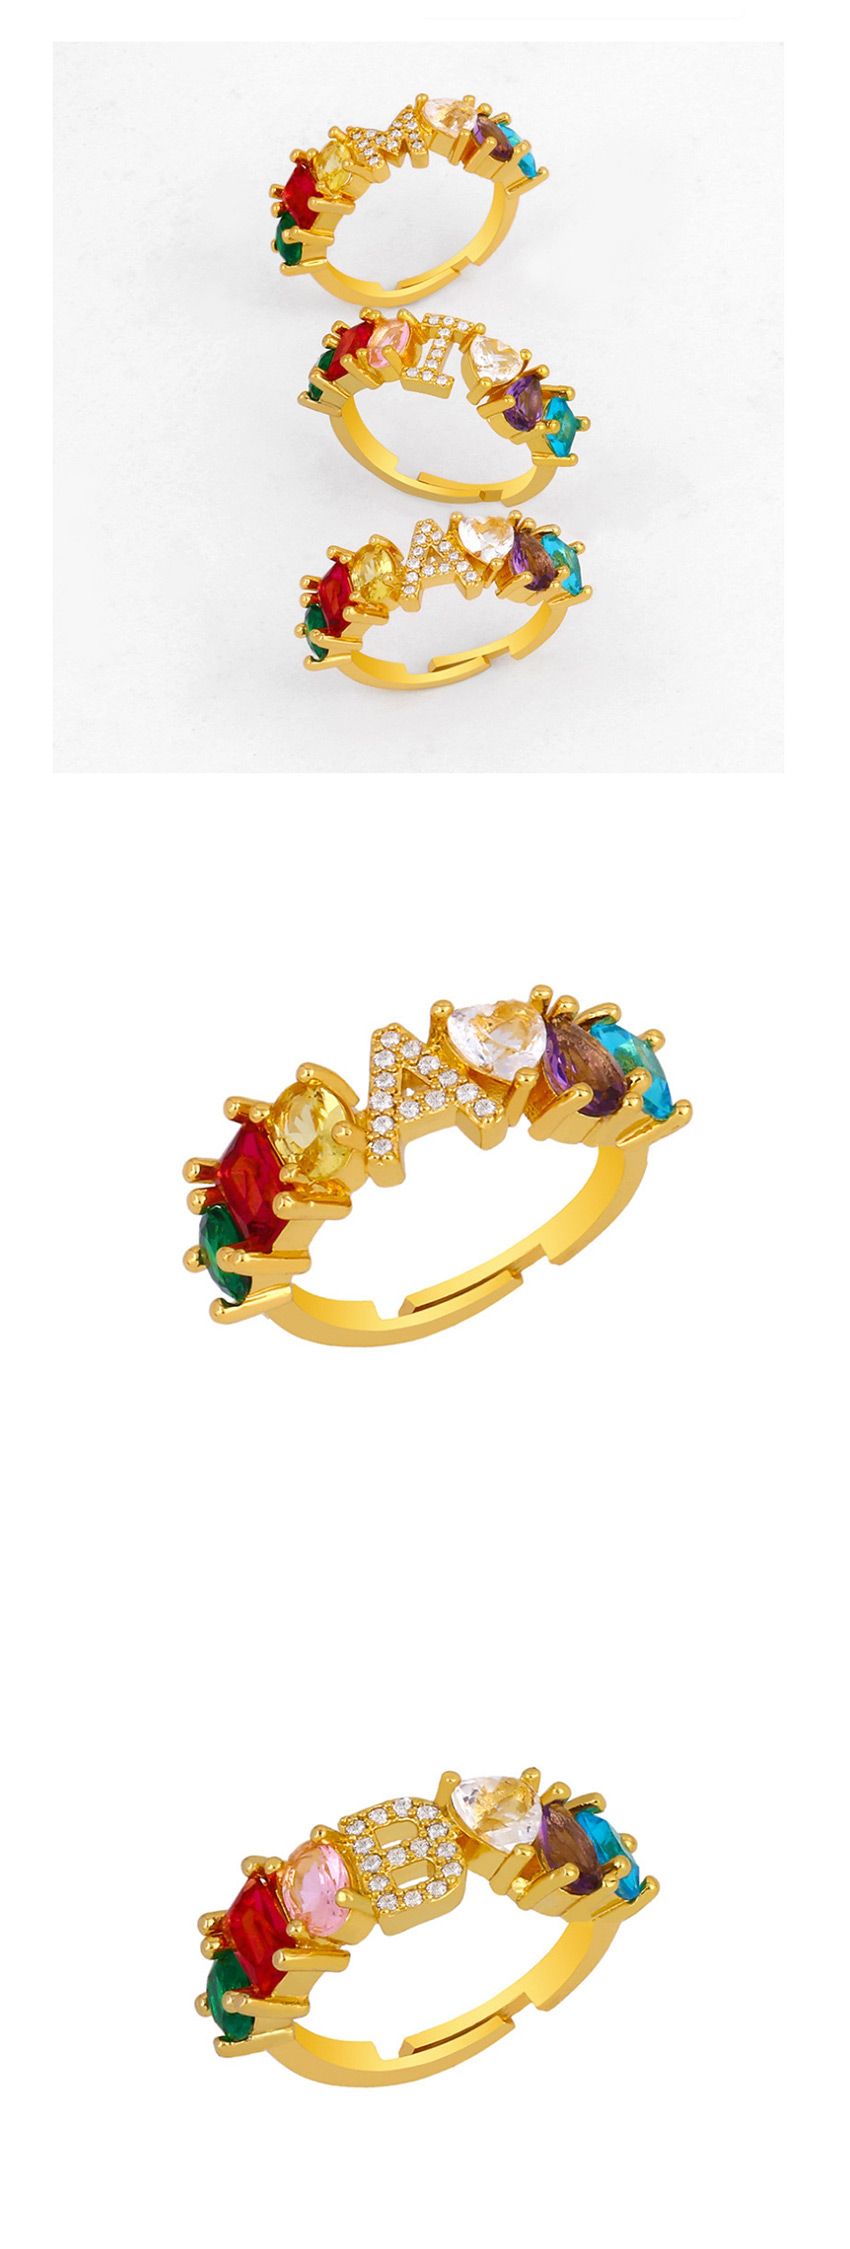 Fashion M Gold Heart-shaped Adjustable Ring With Colorful Diamond Letters,Rings